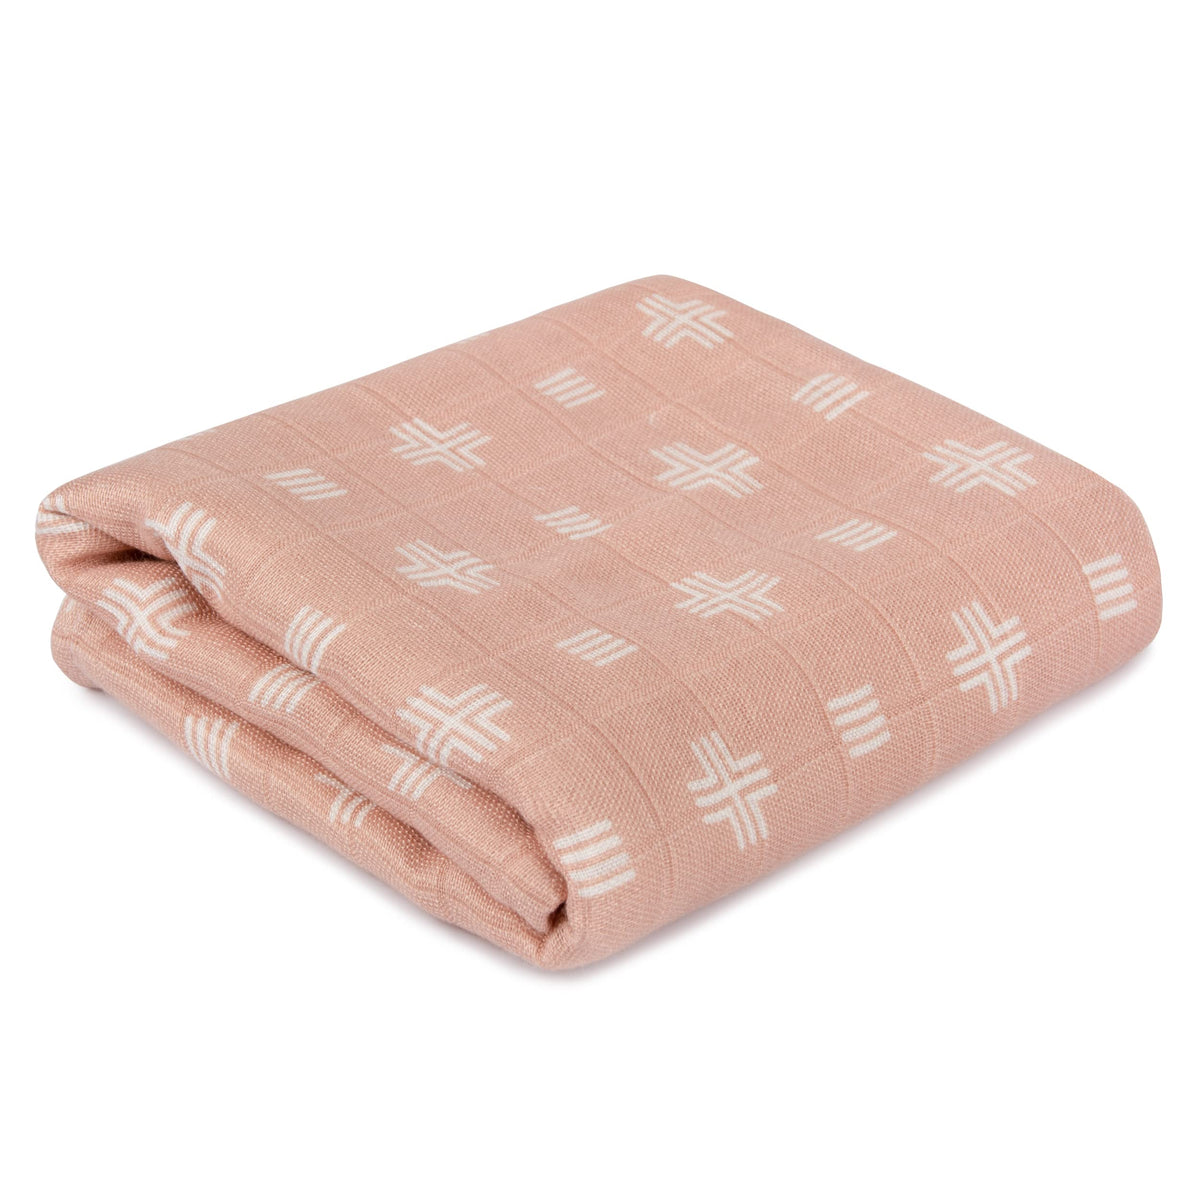 Mush 100% Bamboo Swaddle : Ultra Soft, Breathable, Thermoregulating, Absorbent, Light Weight and Multipurpose Bamboo Wrapper / Baby Bath Towel / Blanket (1, Geo Peach)